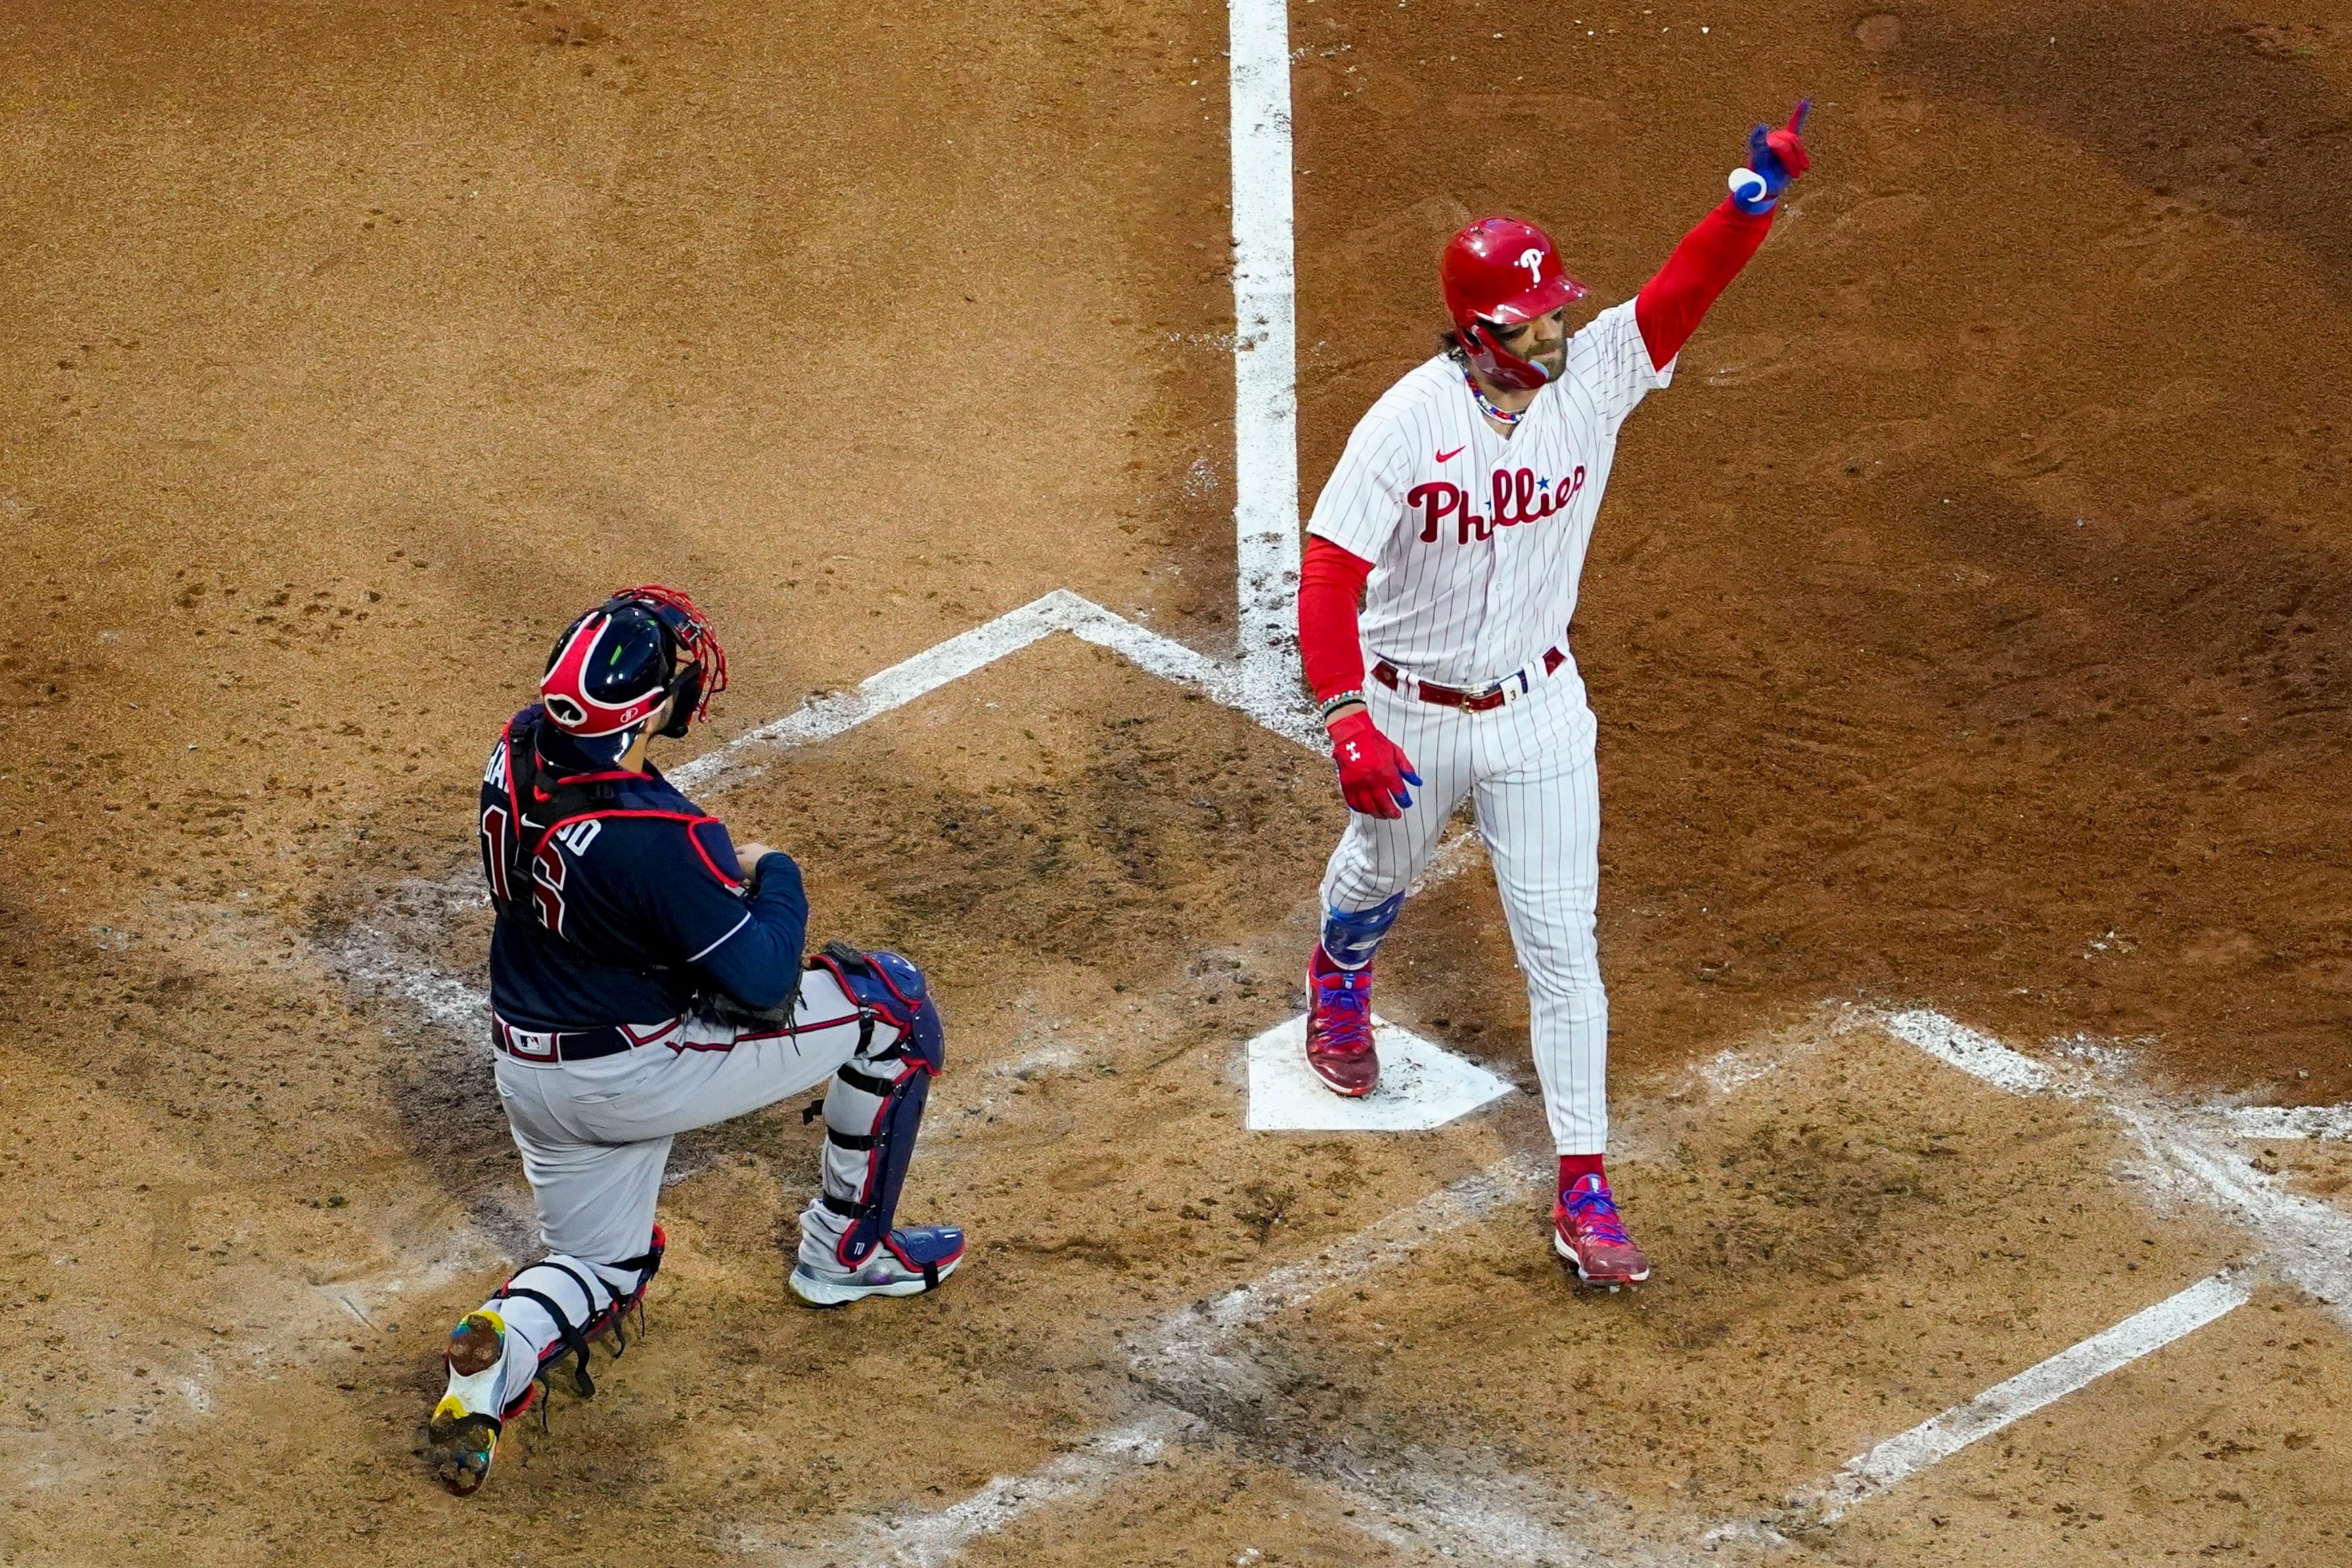 Phillies pounded to death by Braves while wearing ridiculous